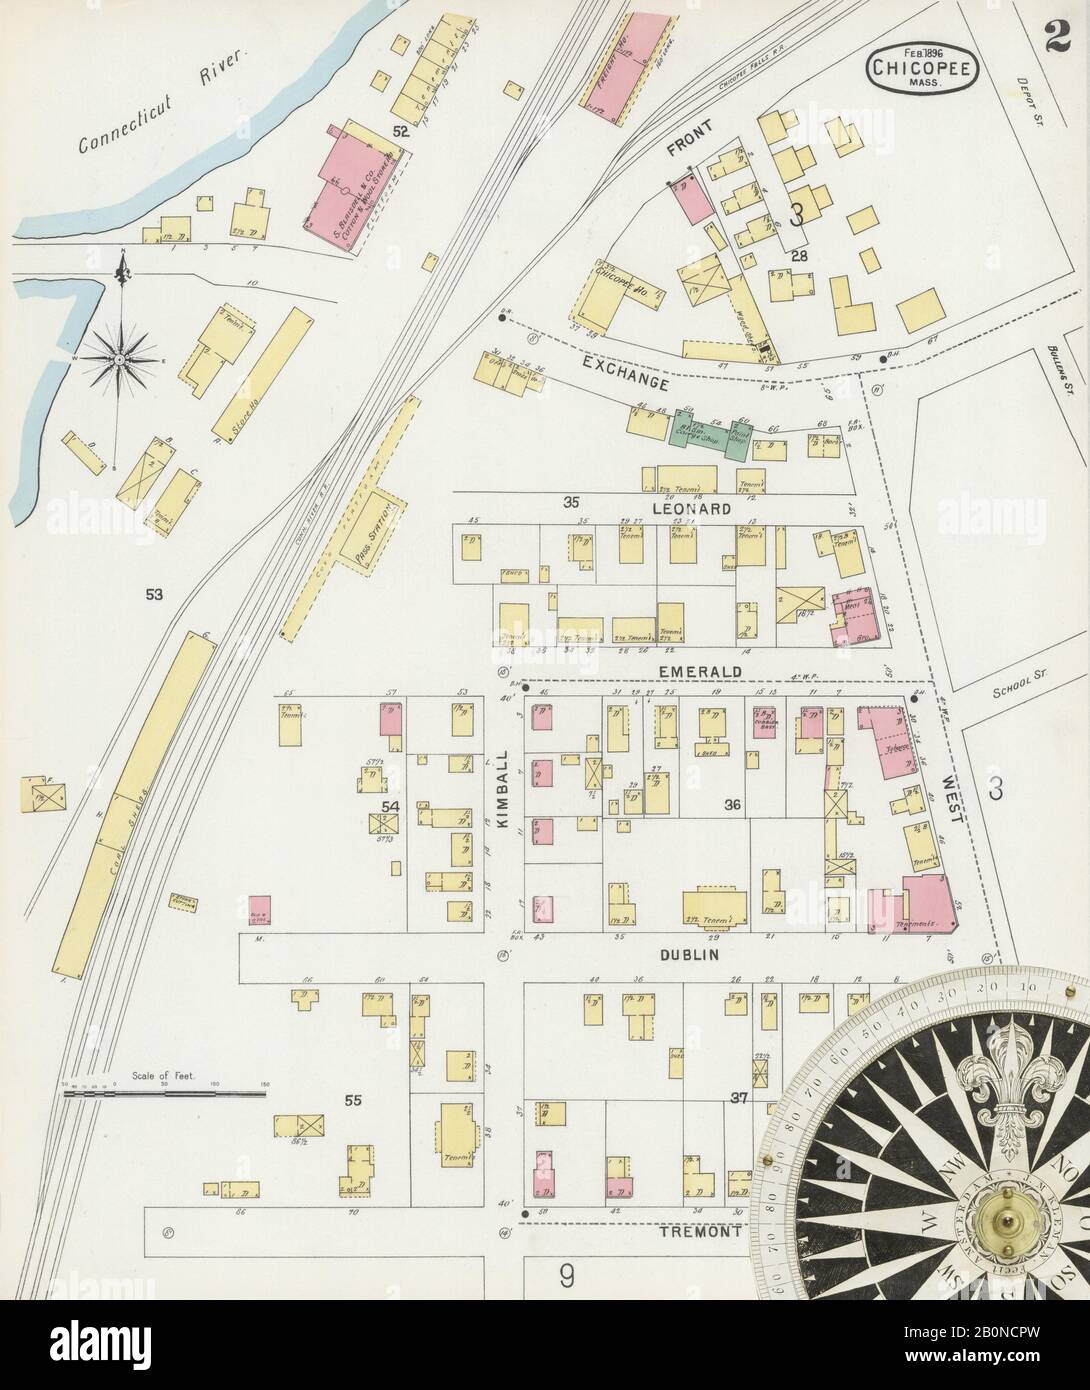 Image 2 of Sanborn Fire Insurance Map from Chicopee, Hampden County, Massachusetts. Feb 1896. 16 Sheet(s). Includes Chicopee Falls, America, street map with a Nineteenth Century compass Stock Photo